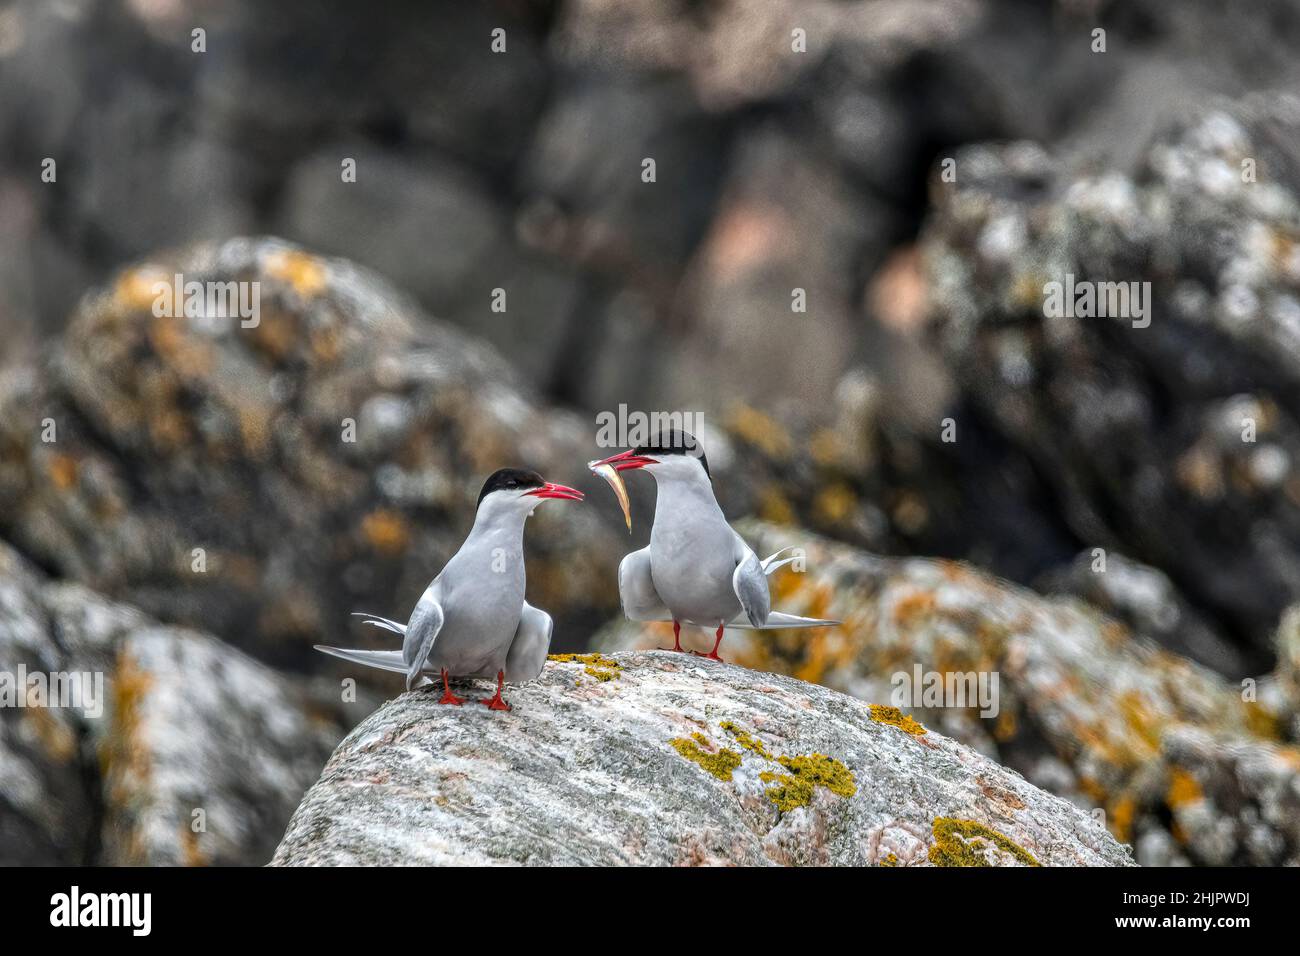 An Arctic tern, Sterna paradisaea, offers its mate a fish as part of a courtship ritual. Stock Photo